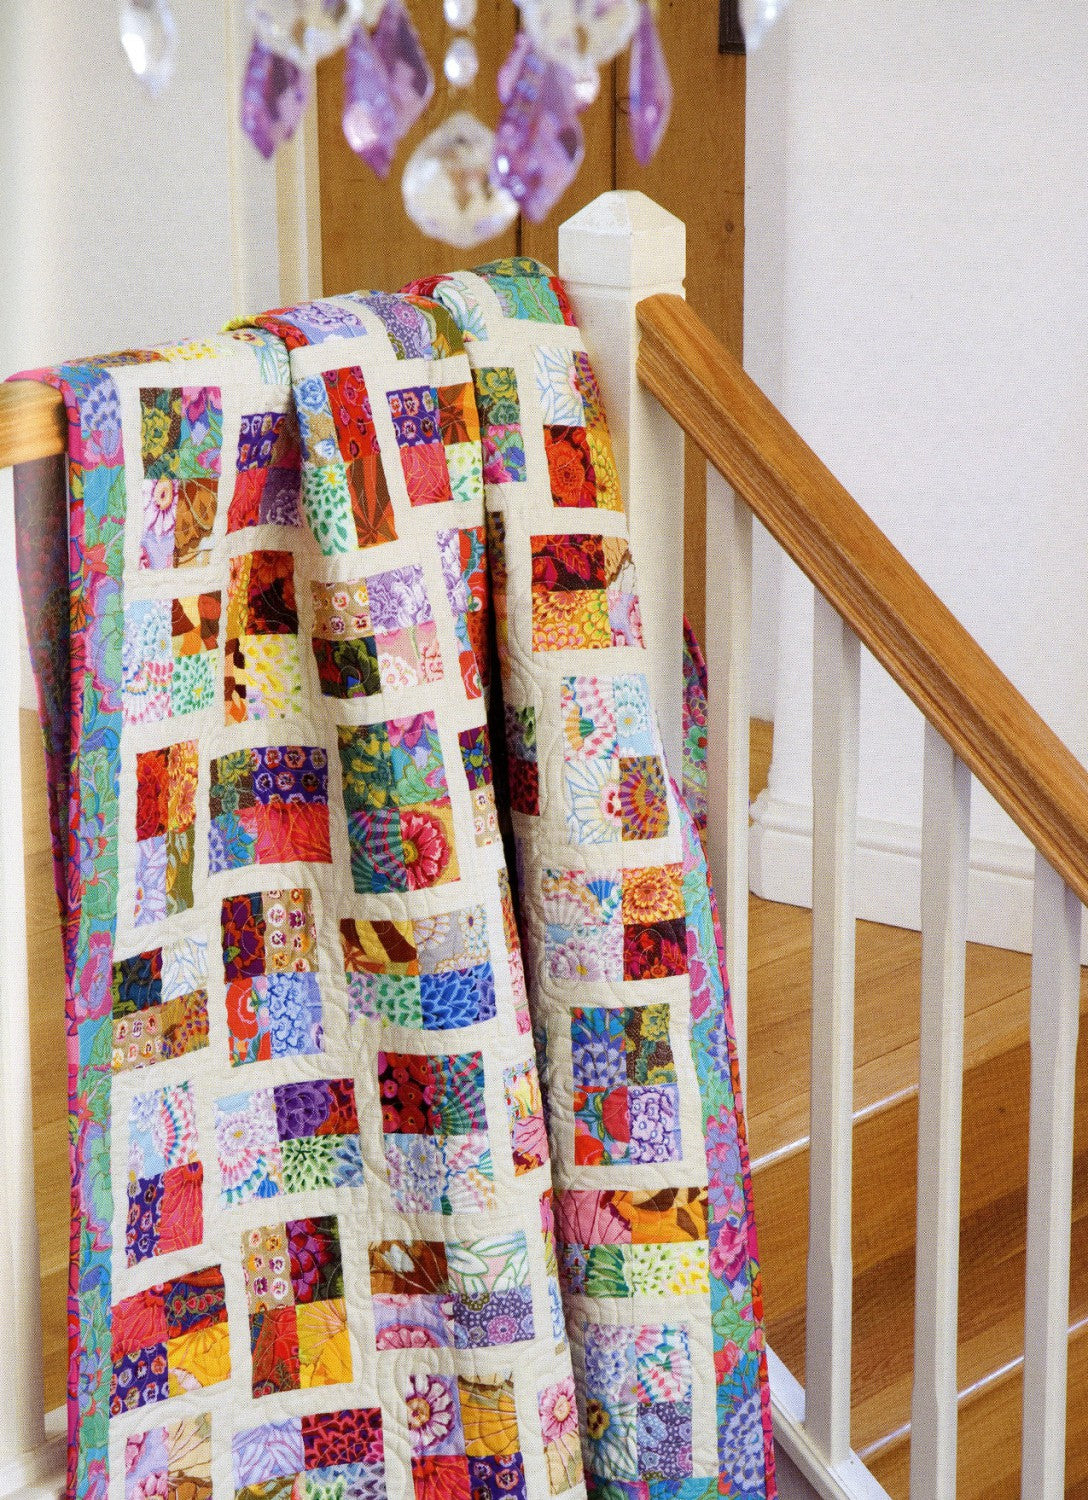 Jelly Roll Quilts by Pam & Nicky Lintott